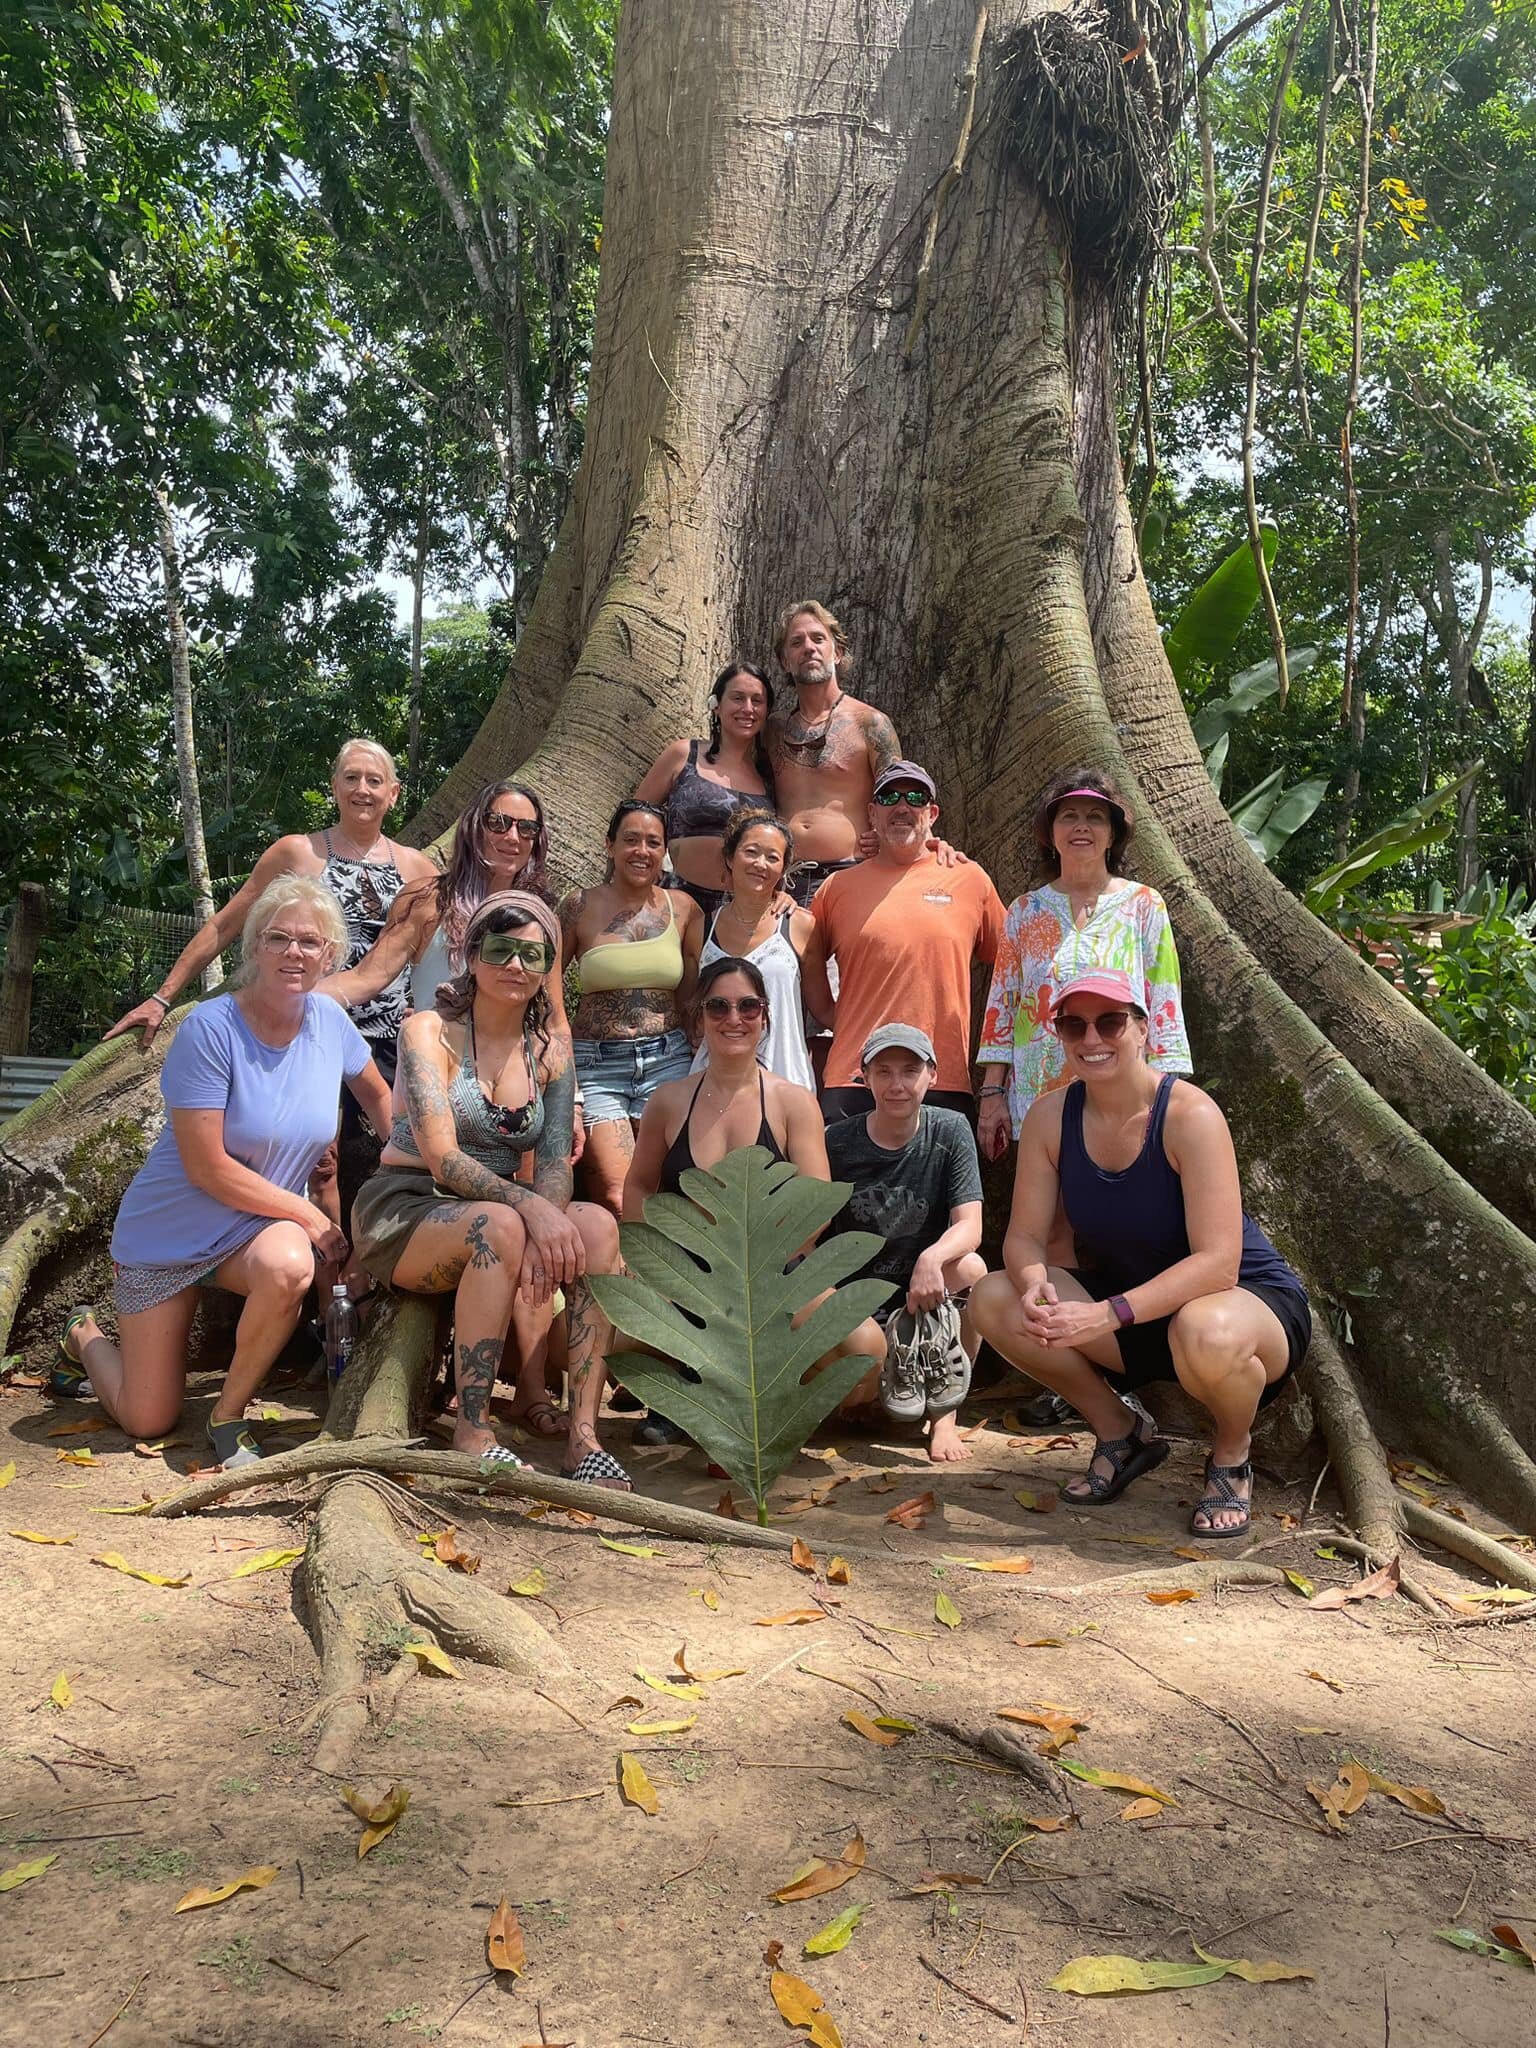 Its time for YOU to treat yourself! ✨ 

How about an all inclusive wellness retreat to the Caribbean of Costa Rica?! 🏝️ 

We are gearing up for our Annual Signature Costa Rica Wellness Retreat! 🙌🏽 Check out our pics from last year! 

Come check ou